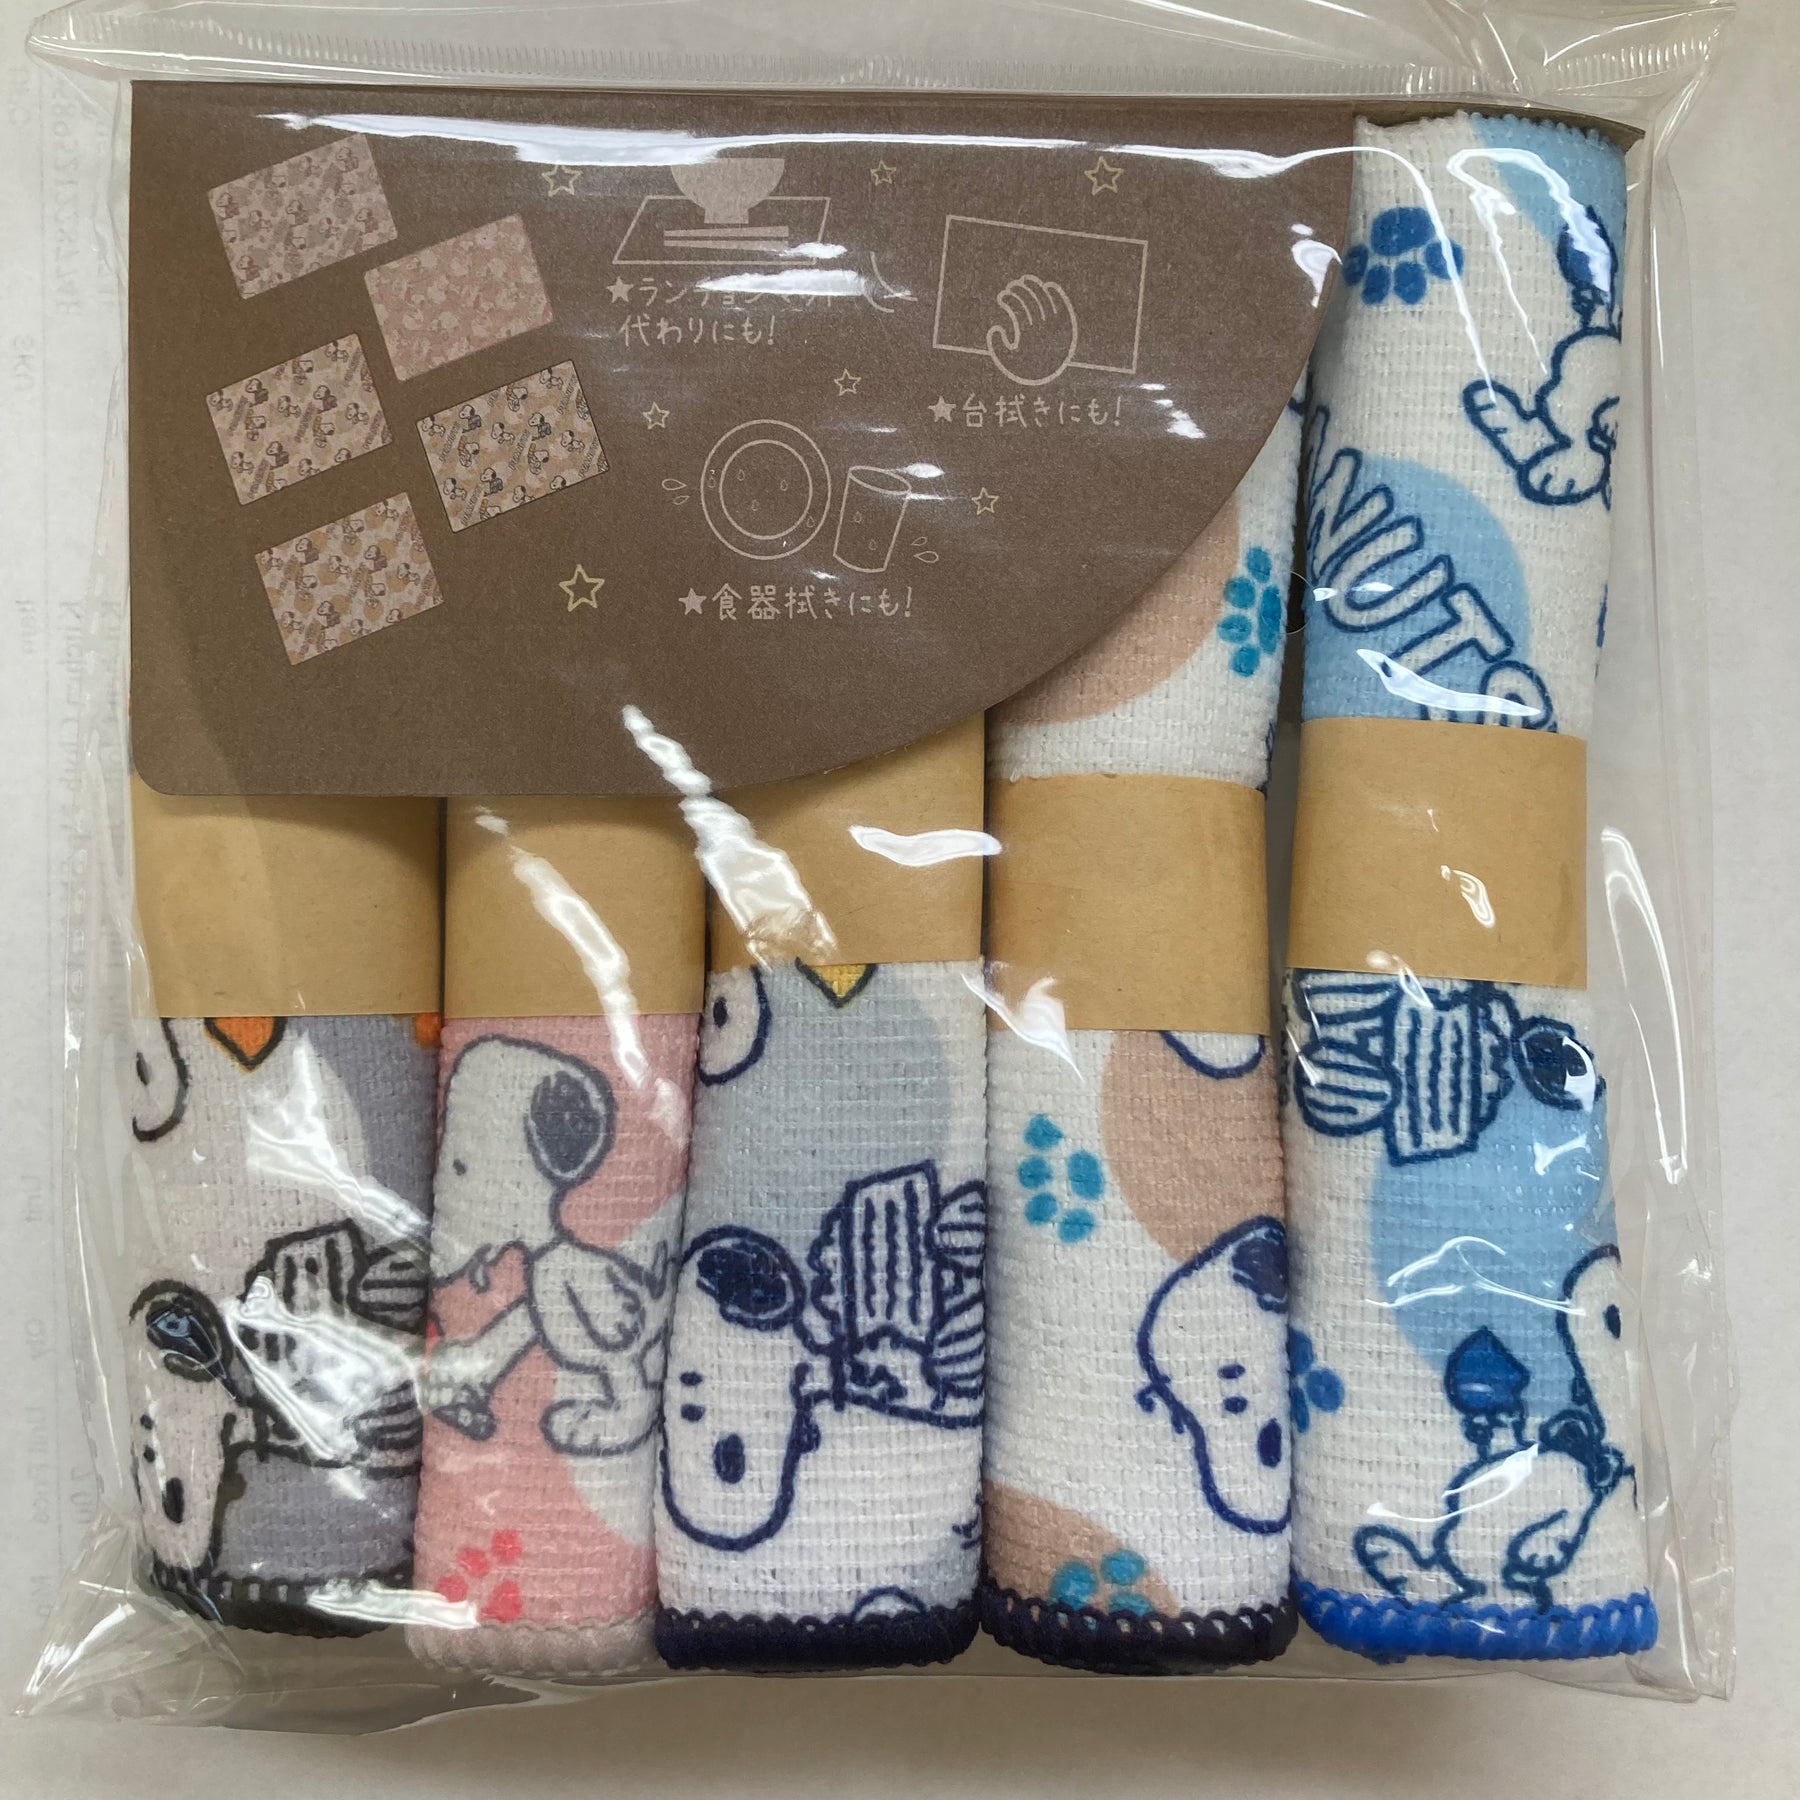 Kitchen Cloth - Snoopy 5in1 (Japan Edition)